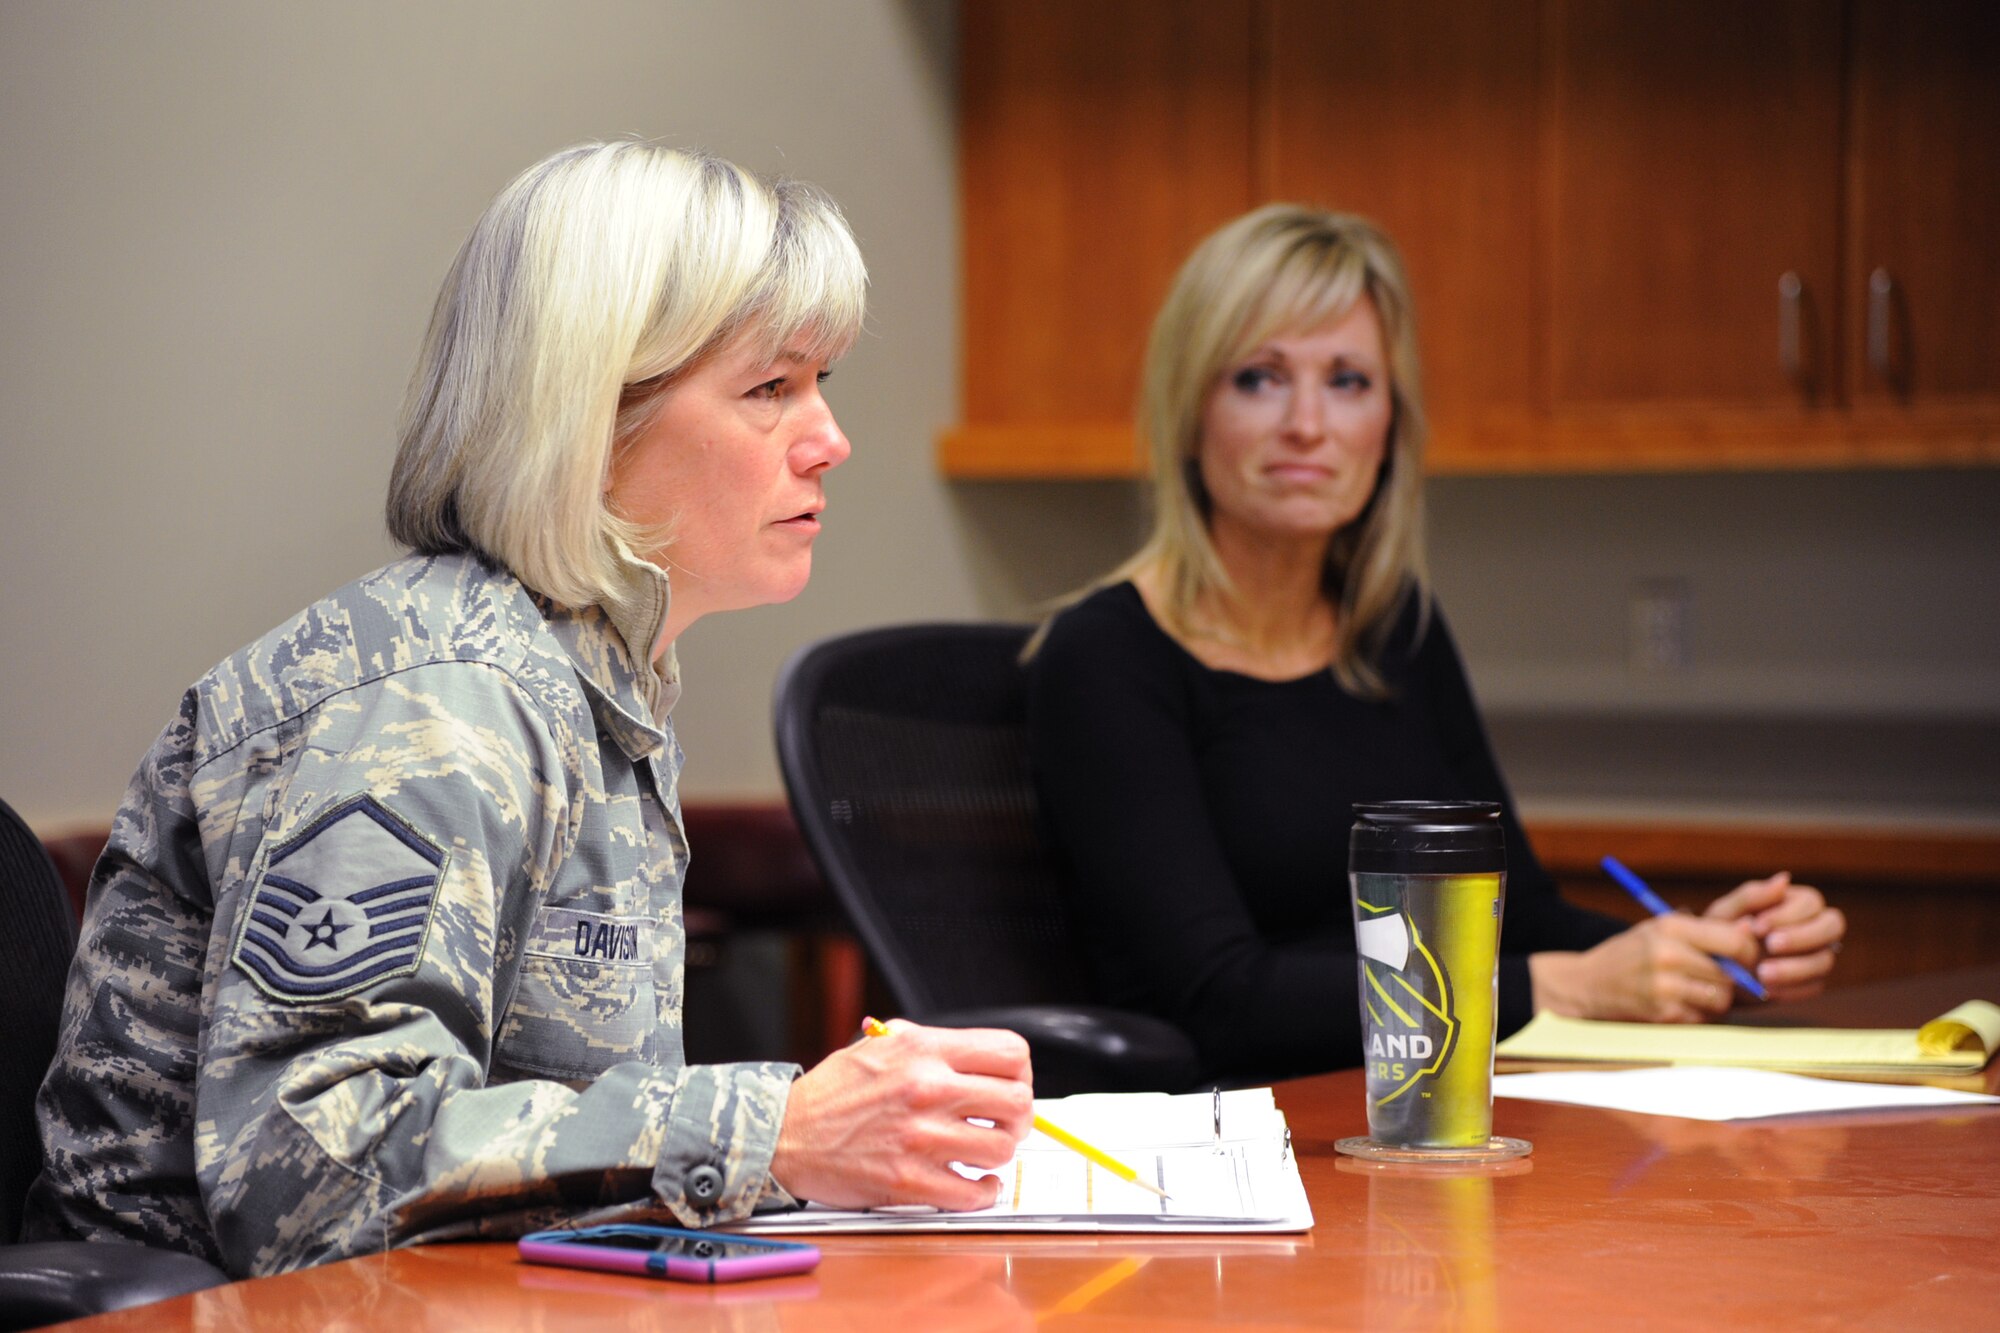 Oregon Air National Guard Master Sgt. Shelly Davison, a public affairs specialist, left, and DeAnn Smetana, Director of Psychological Health, assigned to the 142nd Fighter Wing Headquarters, discuss upcoming classes and activates during a Comprehensive Airman Fitness working group meeting, Jan. 21, 2016, Portland Air National Guard Base, Ore. The 142nd Fighter Wing began 2016 with a new series of courses and activities under the Comprehensive Airmen Fitness program, designed to focus on Airmen and their families' physical, social, mental and spiritual wellness. (U.S. Air National Guard photo by Tech. Sgt. John Hughel, 142nd Fighter Wing Public Affairs/released)